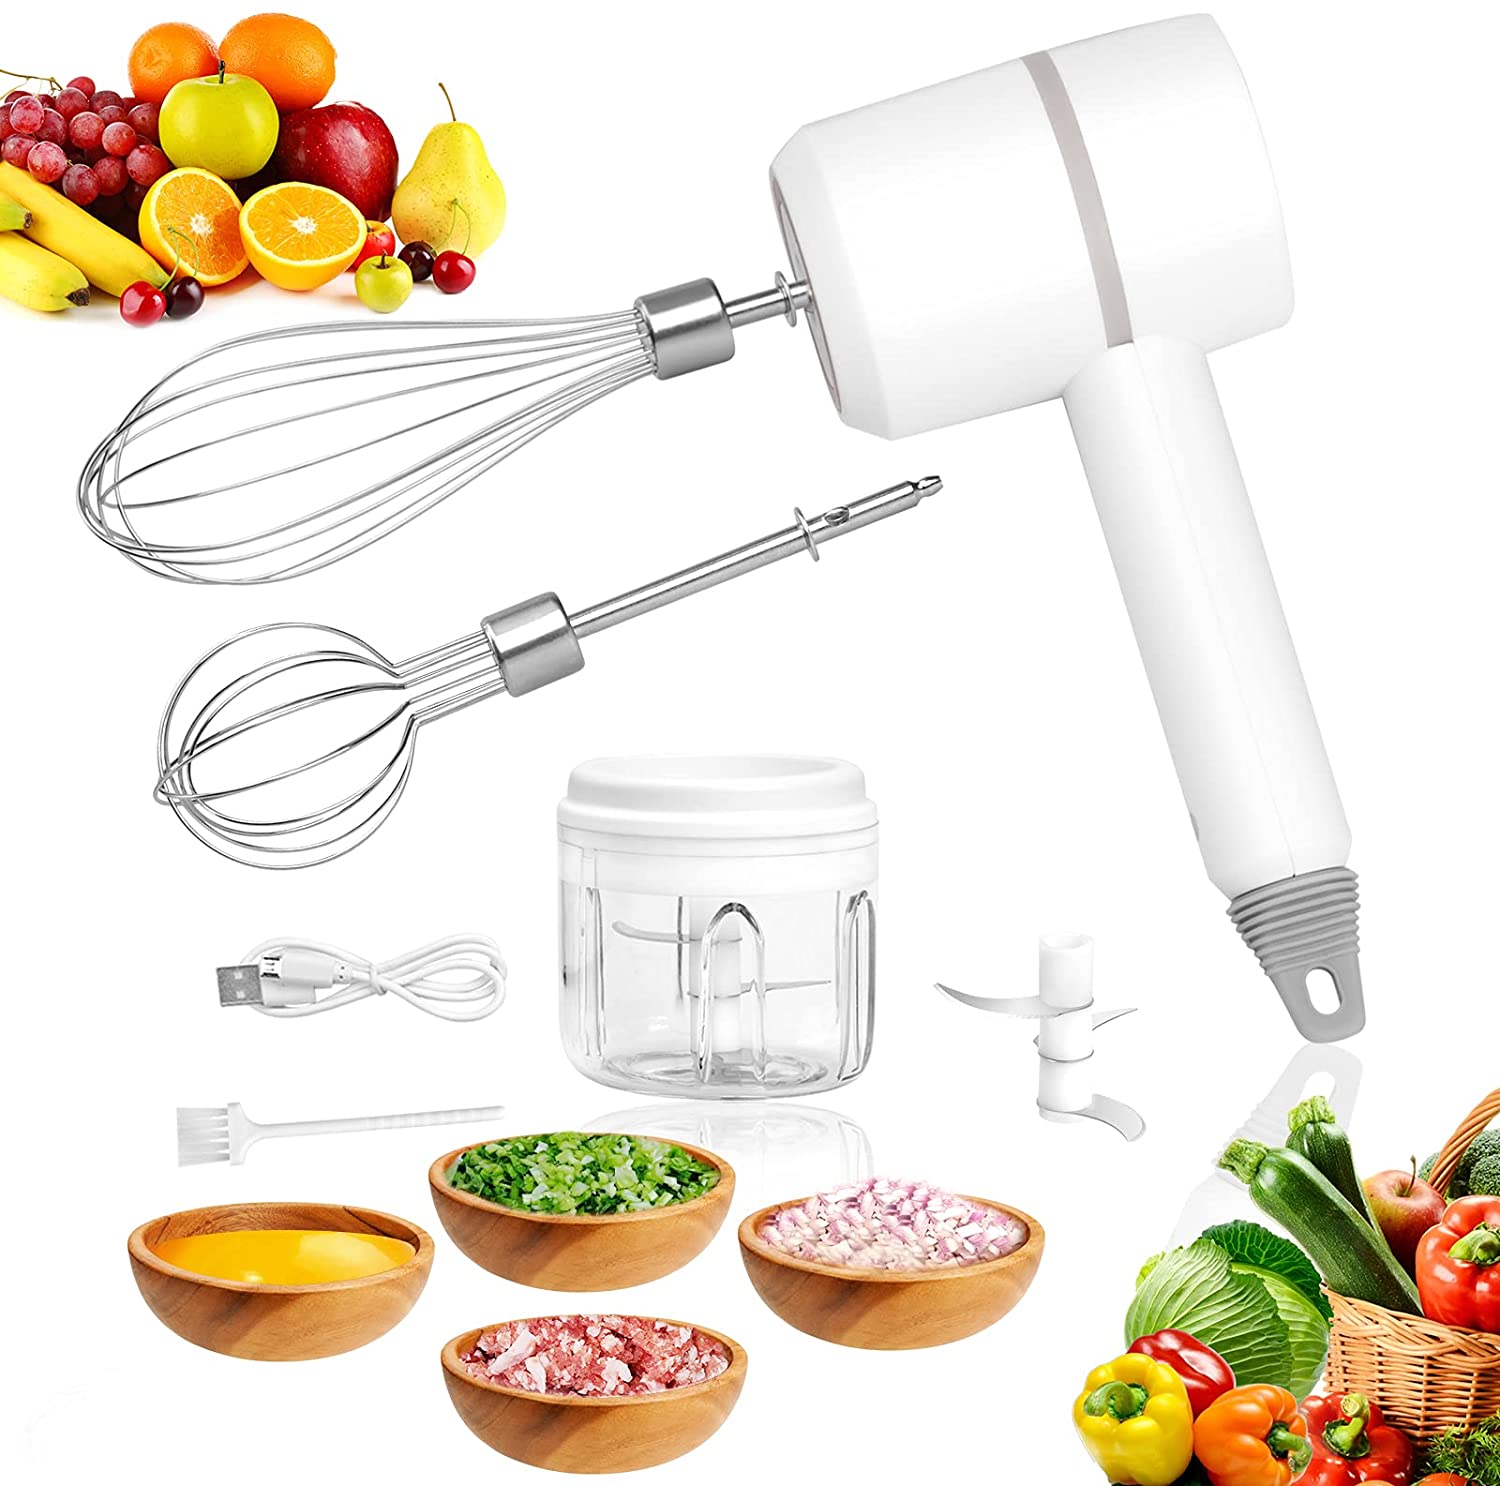 Electric Hand Mixer & Food Chopper 2 in 1